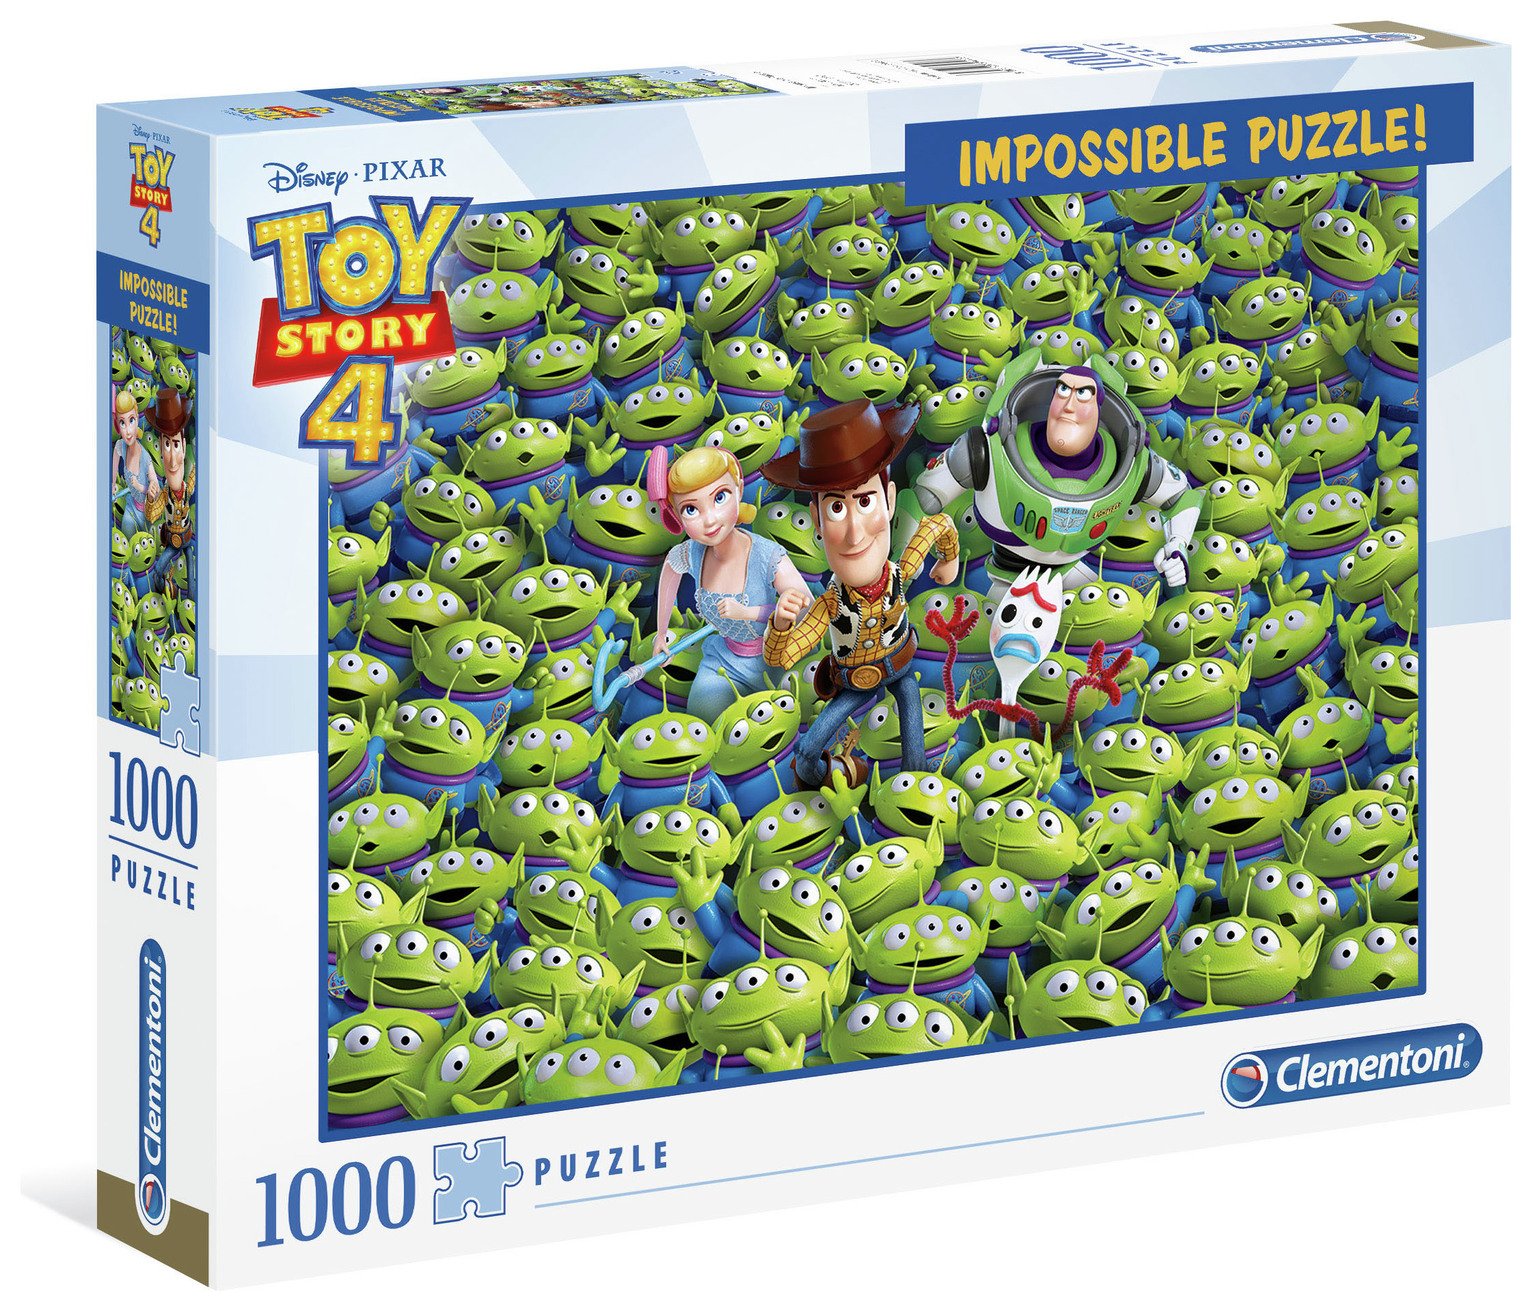 Disney Toy Story 4 Alien Impossible 1000 Piece Puzzle Review